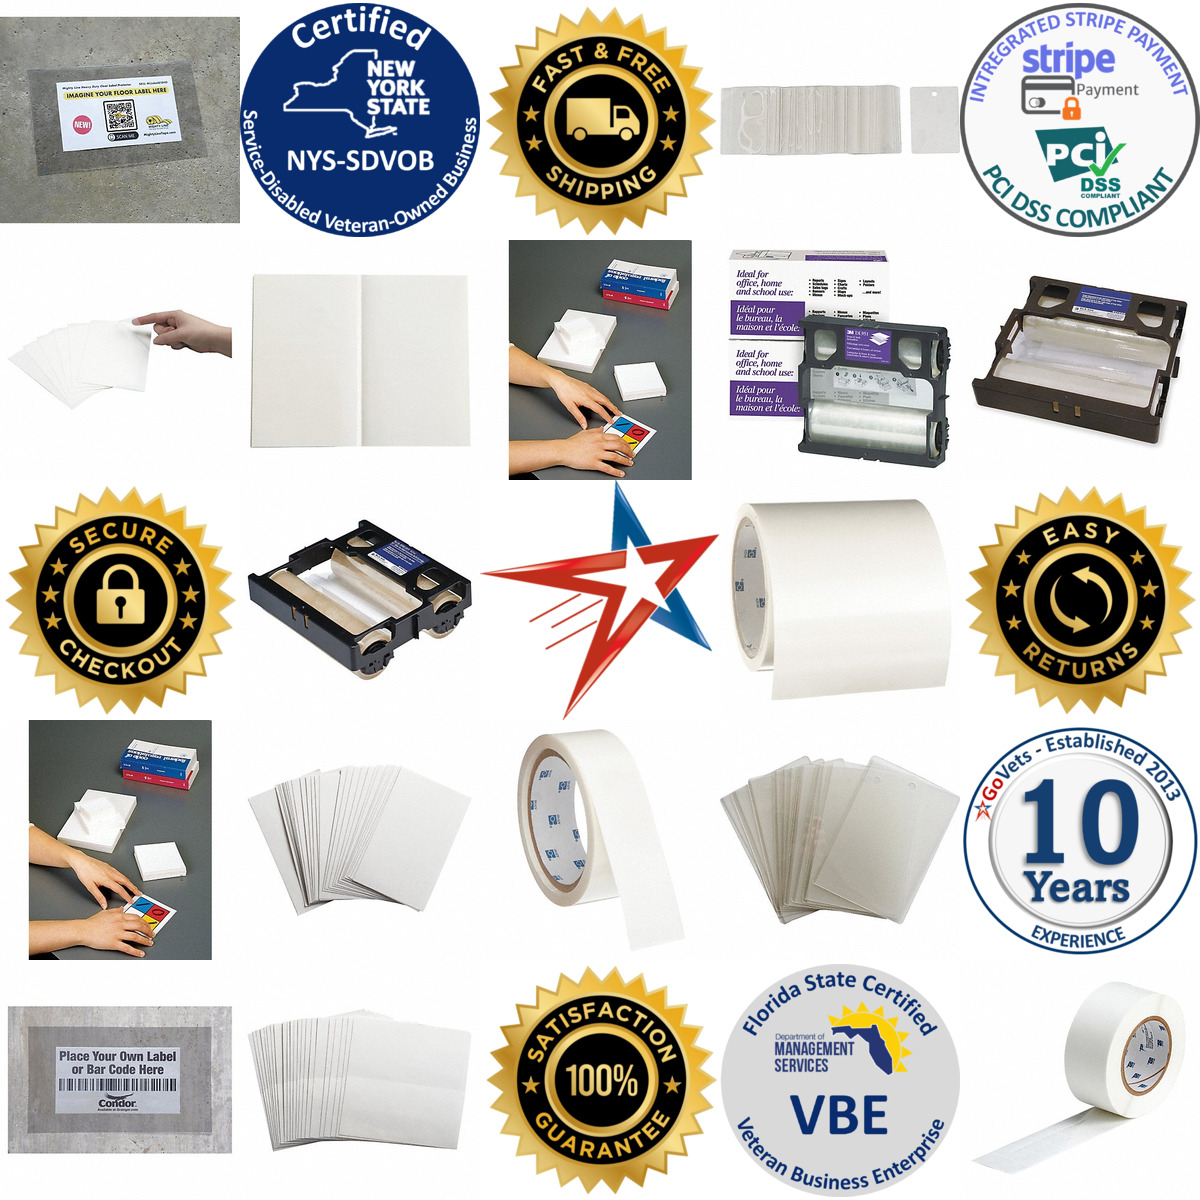 A selection of Label Protection Laminate and Overlays products on GoVets